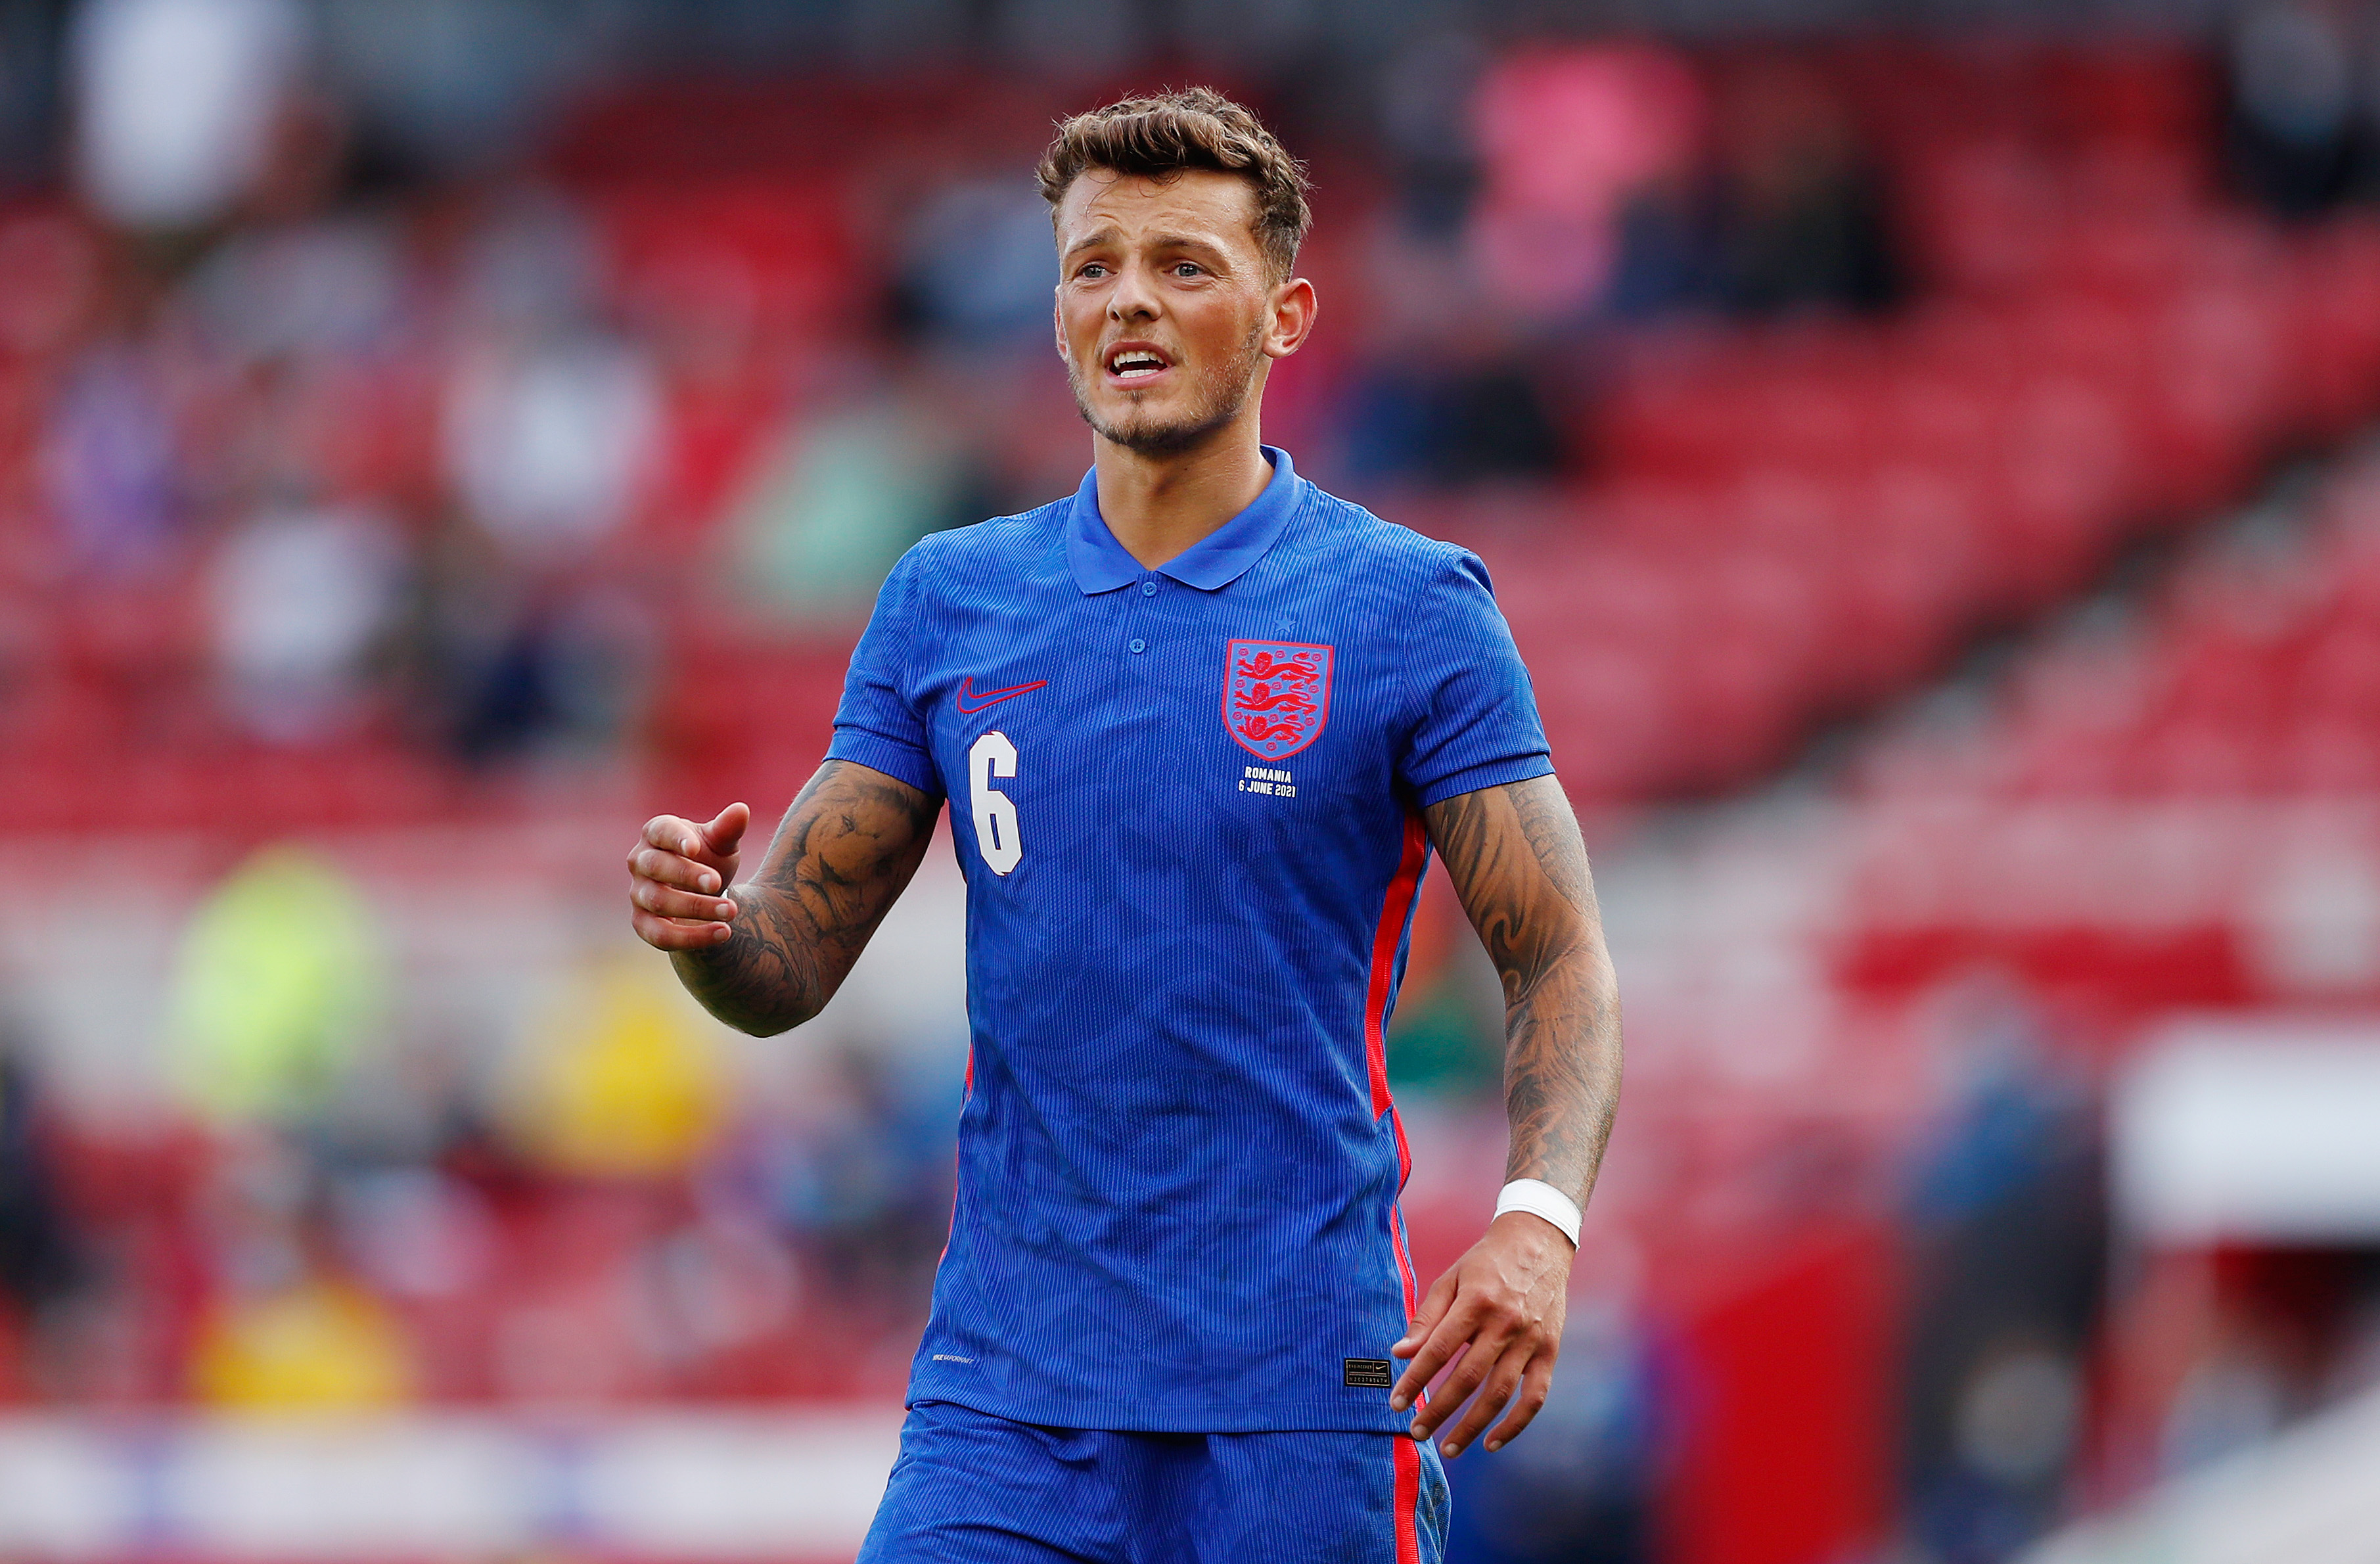 Ben White called up to replace Trent Alexander-Arnold for England at Euro 2020